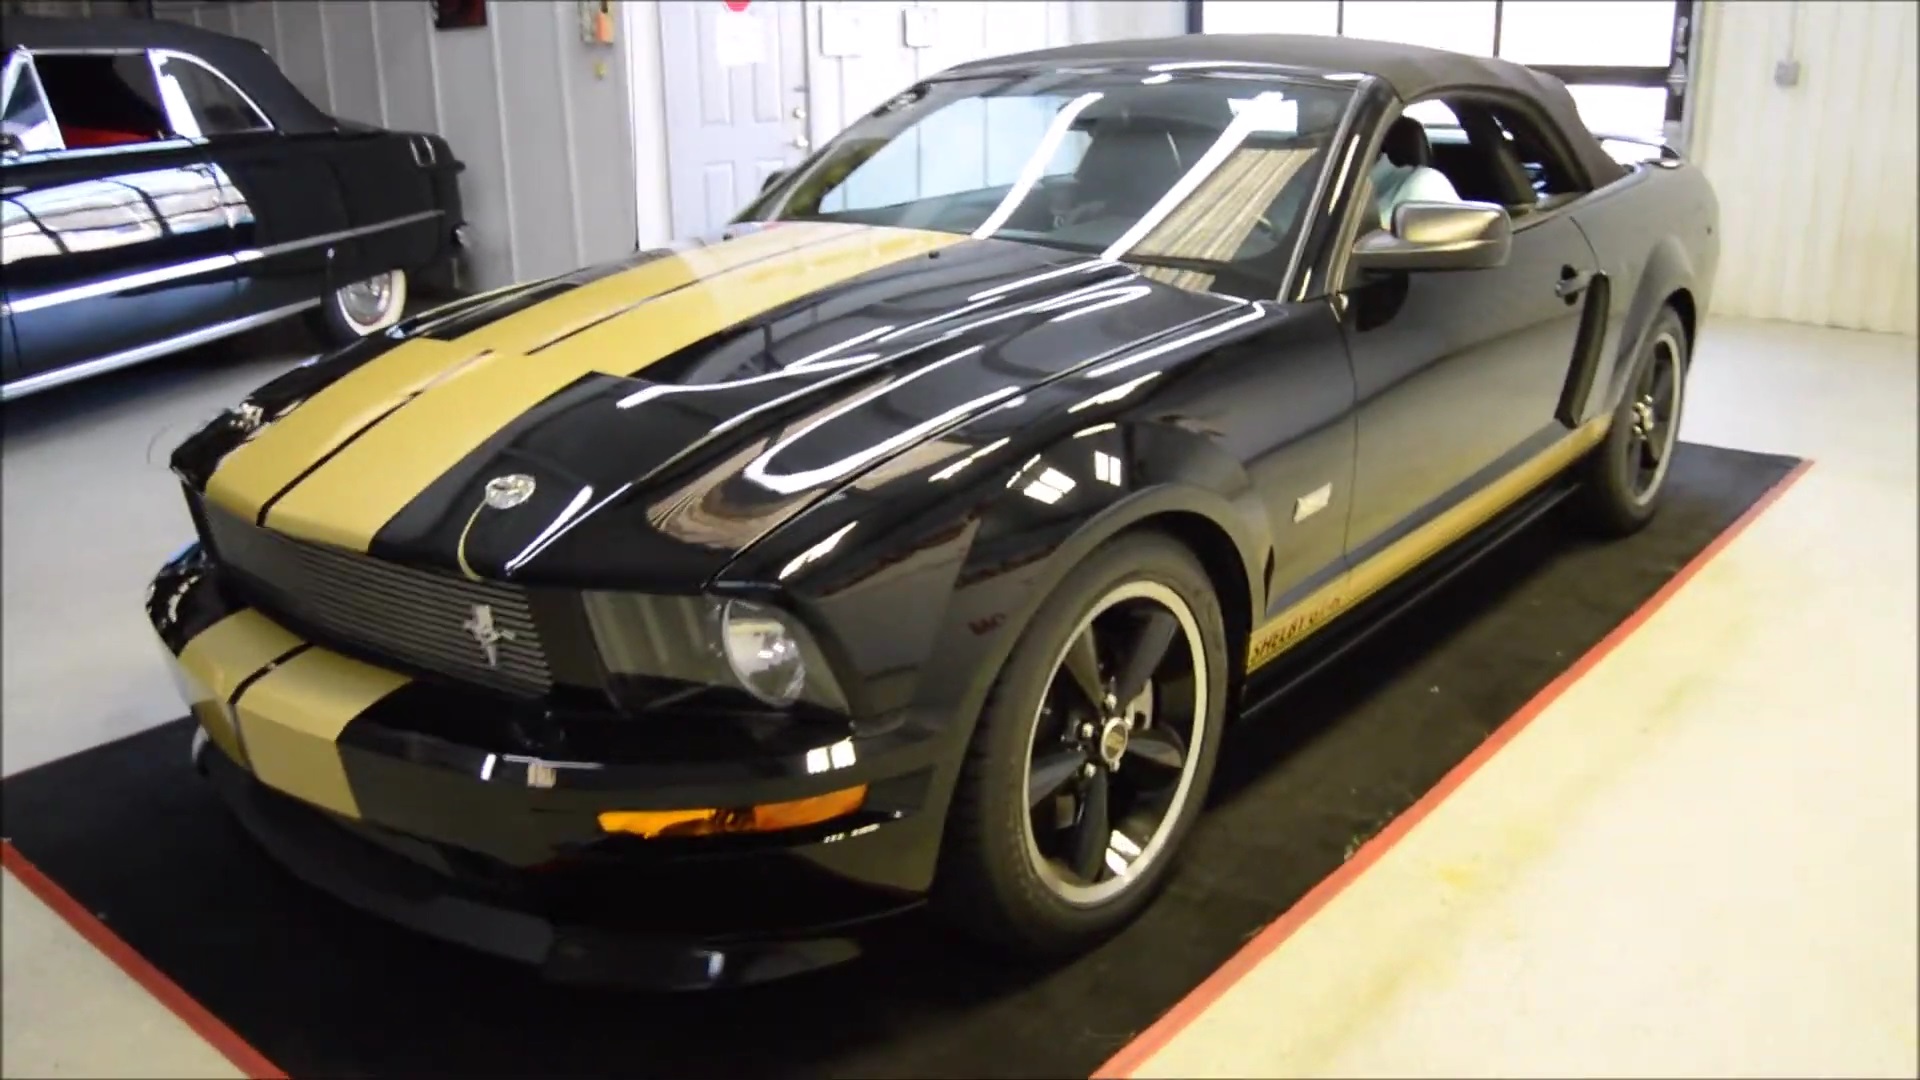 Video: 2007 Ford Mustang Shelby GT-H Walkaround